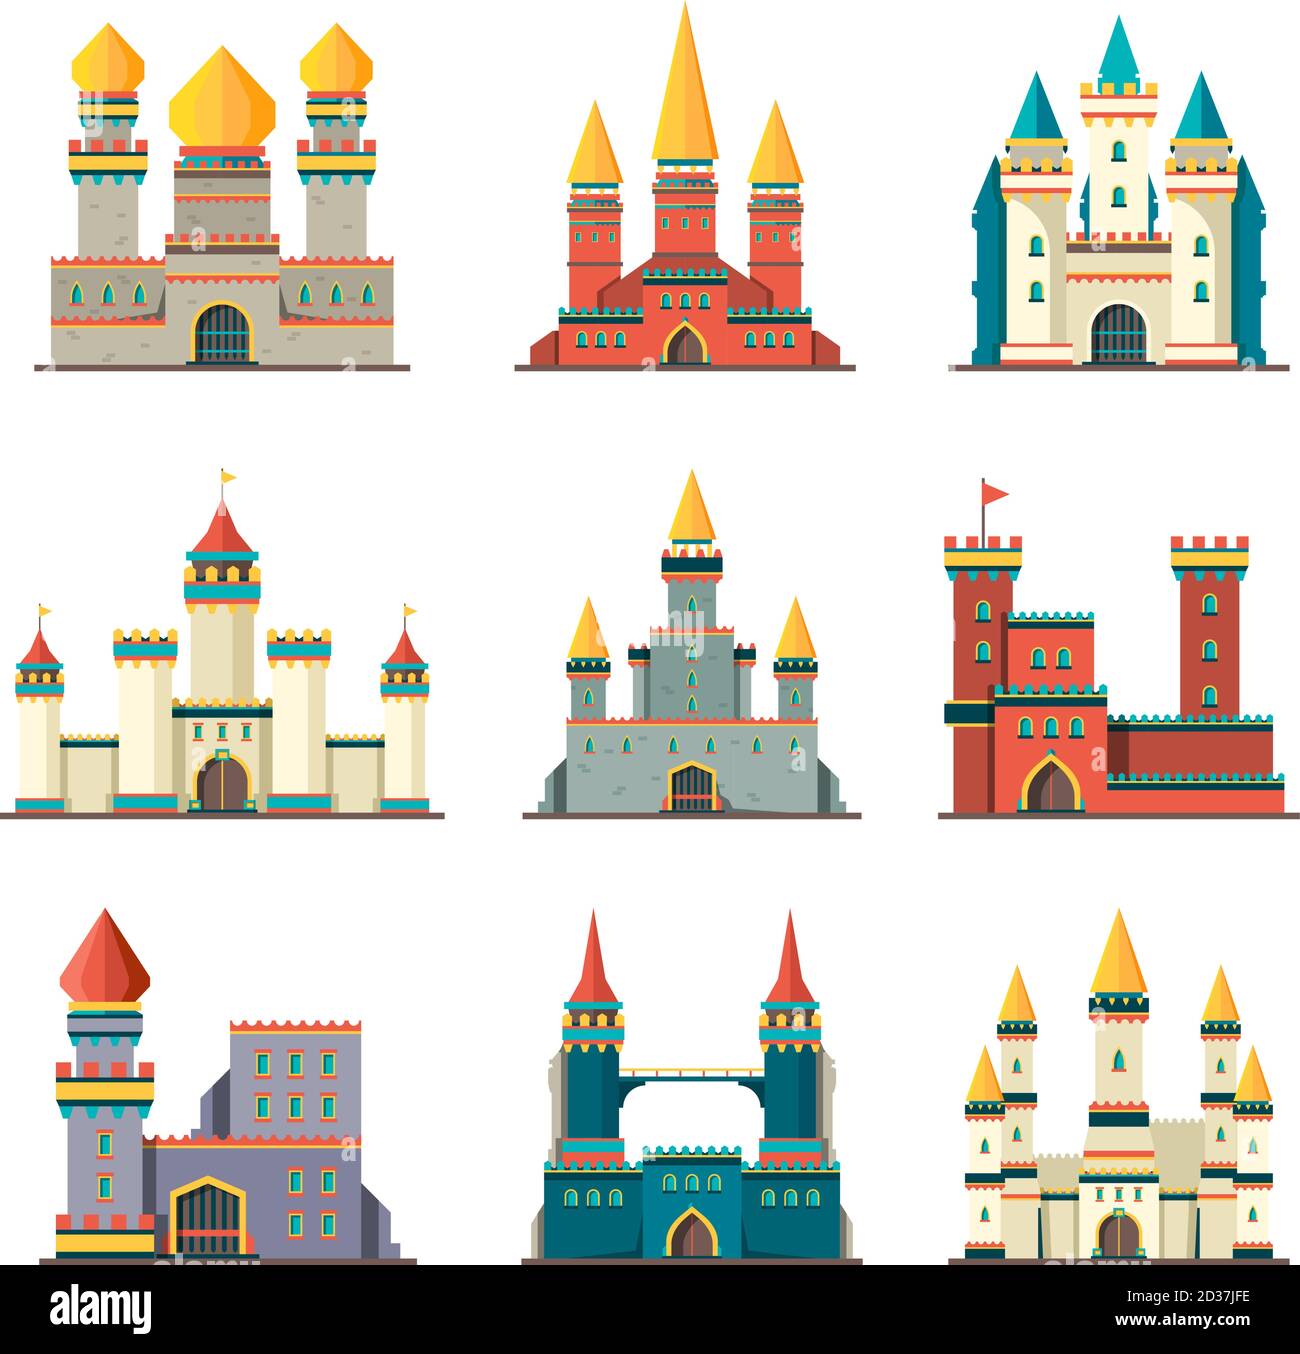 Medieval castles. Palace tower fairytale constructions cartoon vector buildings flat castles pictures Stock Vector